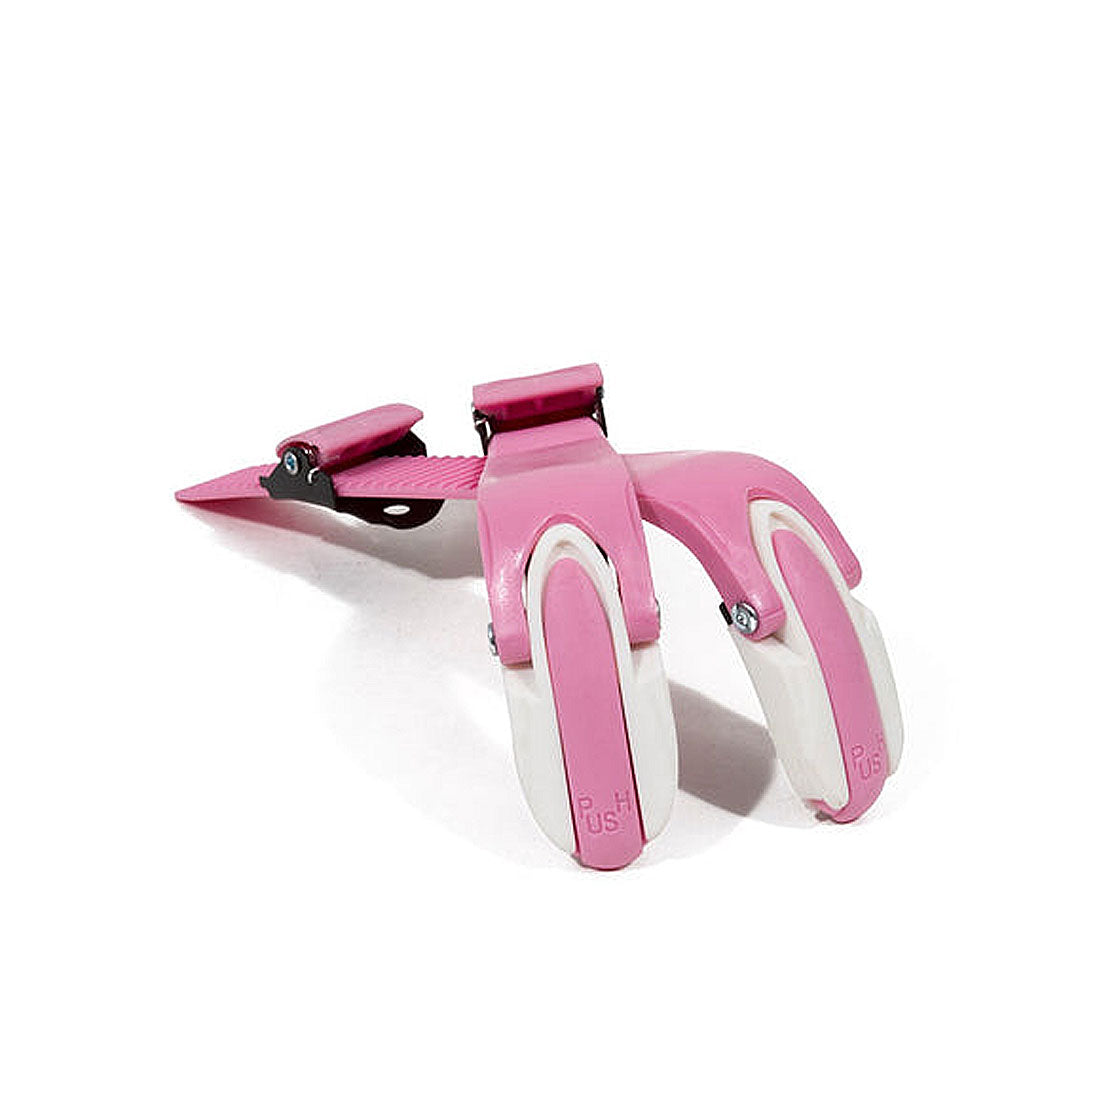 SFR Buckle Set - Pink Inline Hardware and Parts